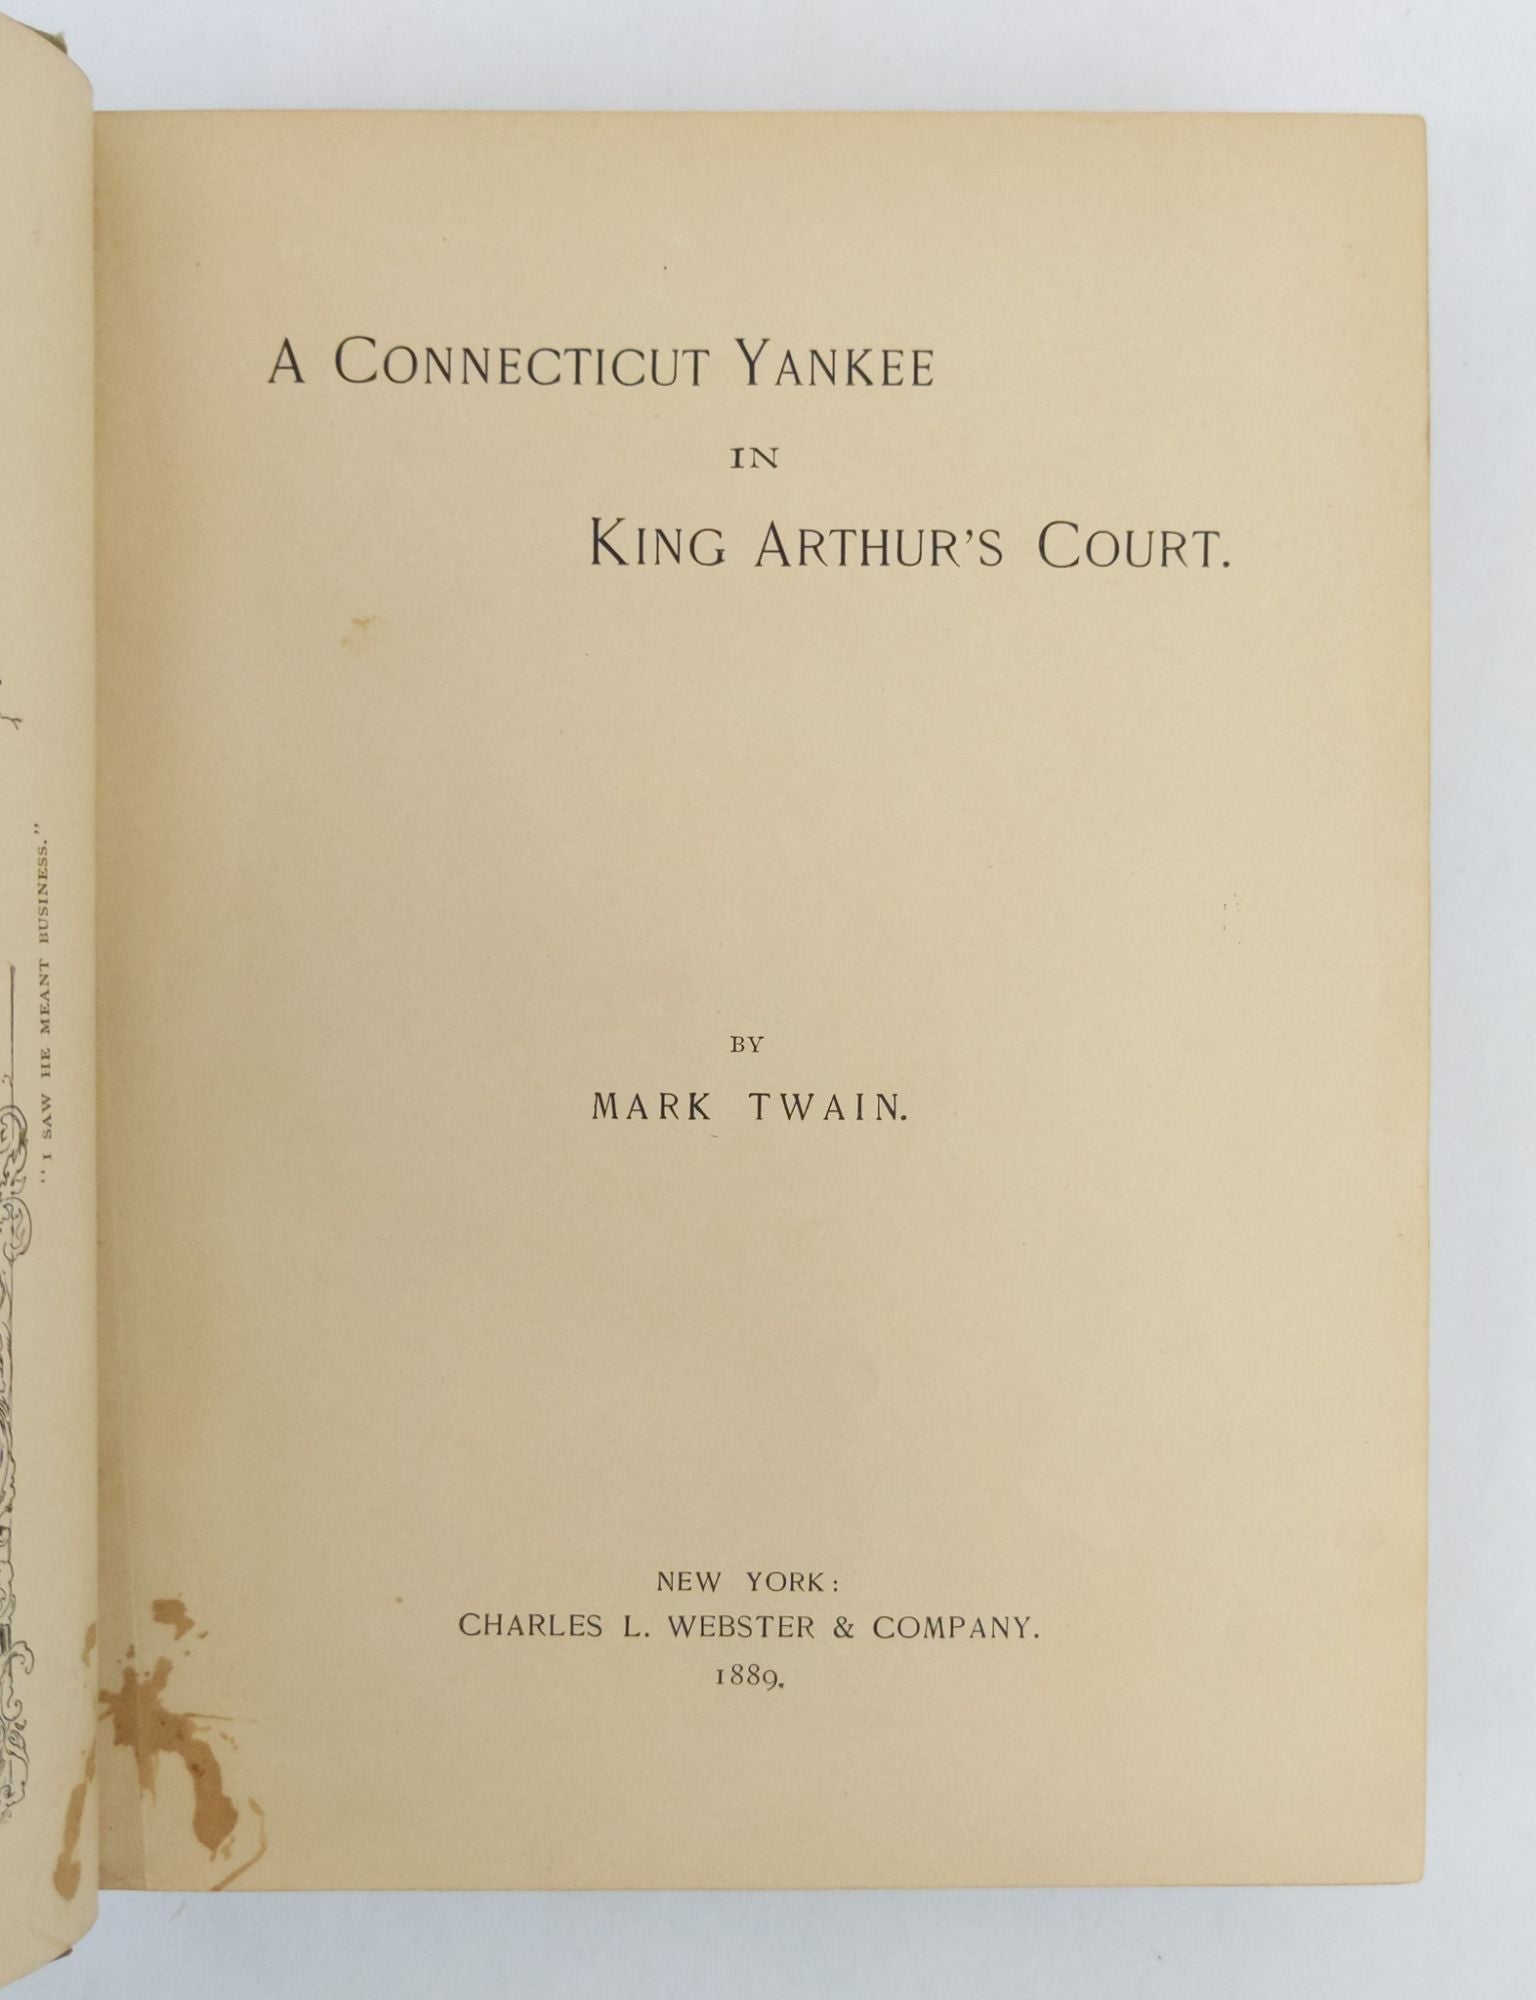 Product Image for A YANKEE IN KING ARTHUR'S COURT